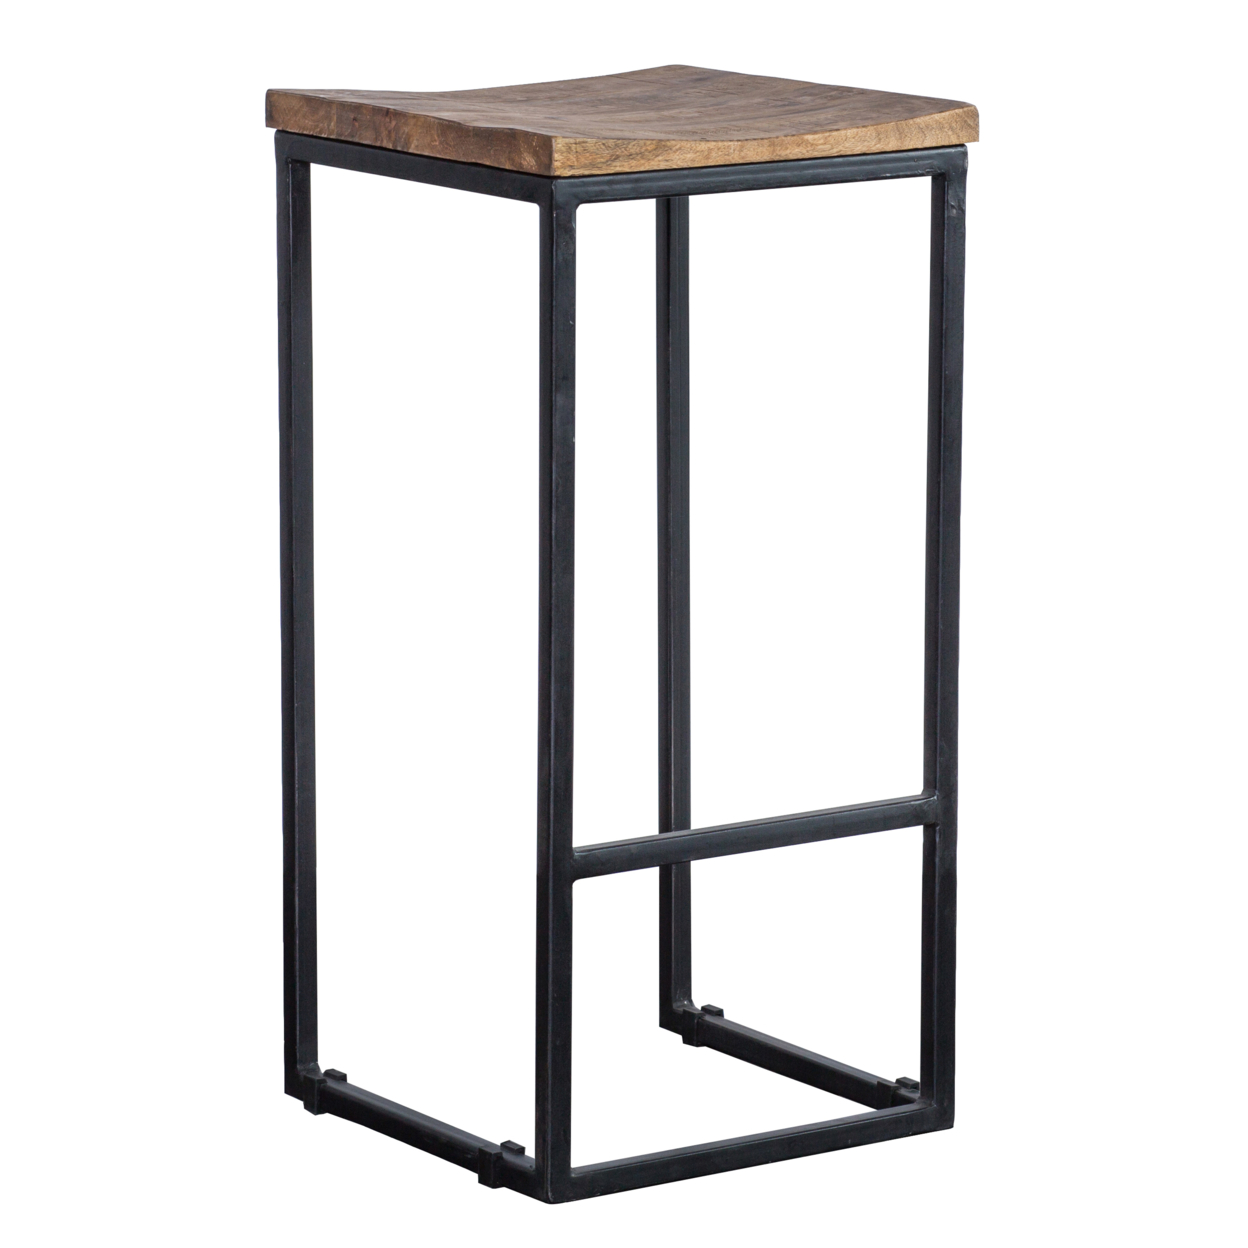 Iron Base Counter Height Stool With Wooden Saddle Seat, Brown And Black- Saltoro Sherpi